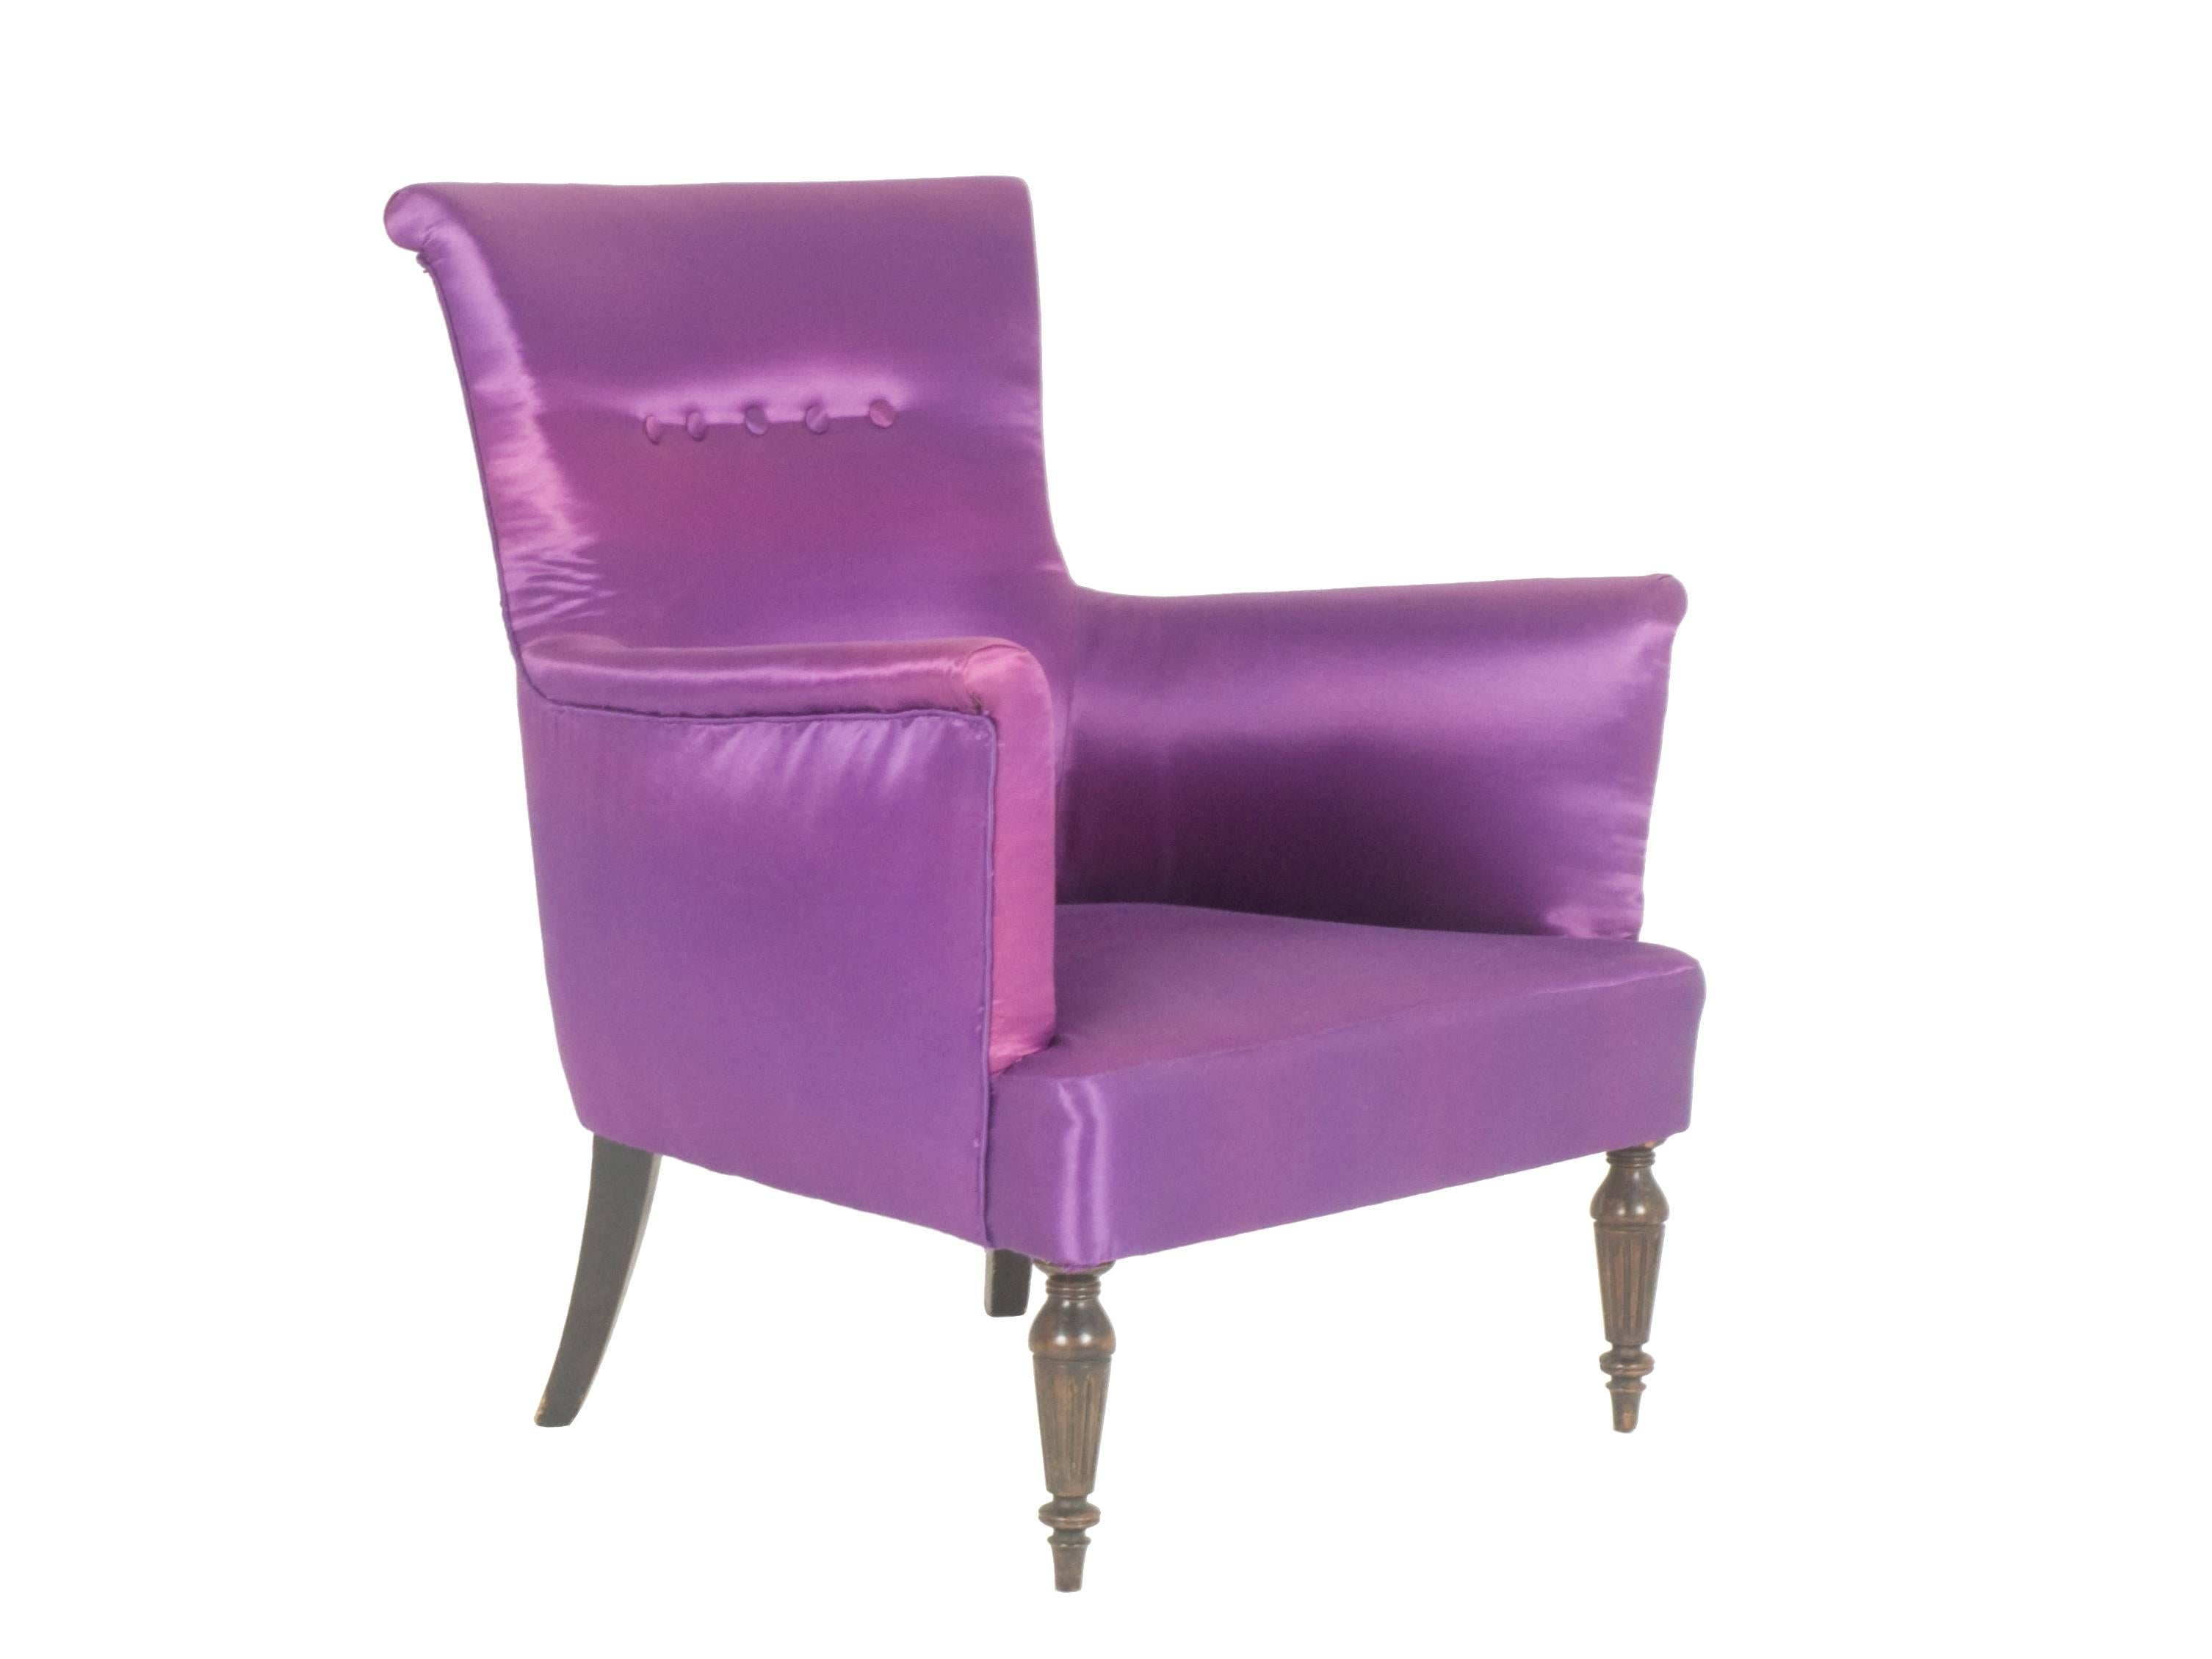 Mid-20th Century Violet Fabric Italian Armchairs from 1950s, Set of Two For Sale